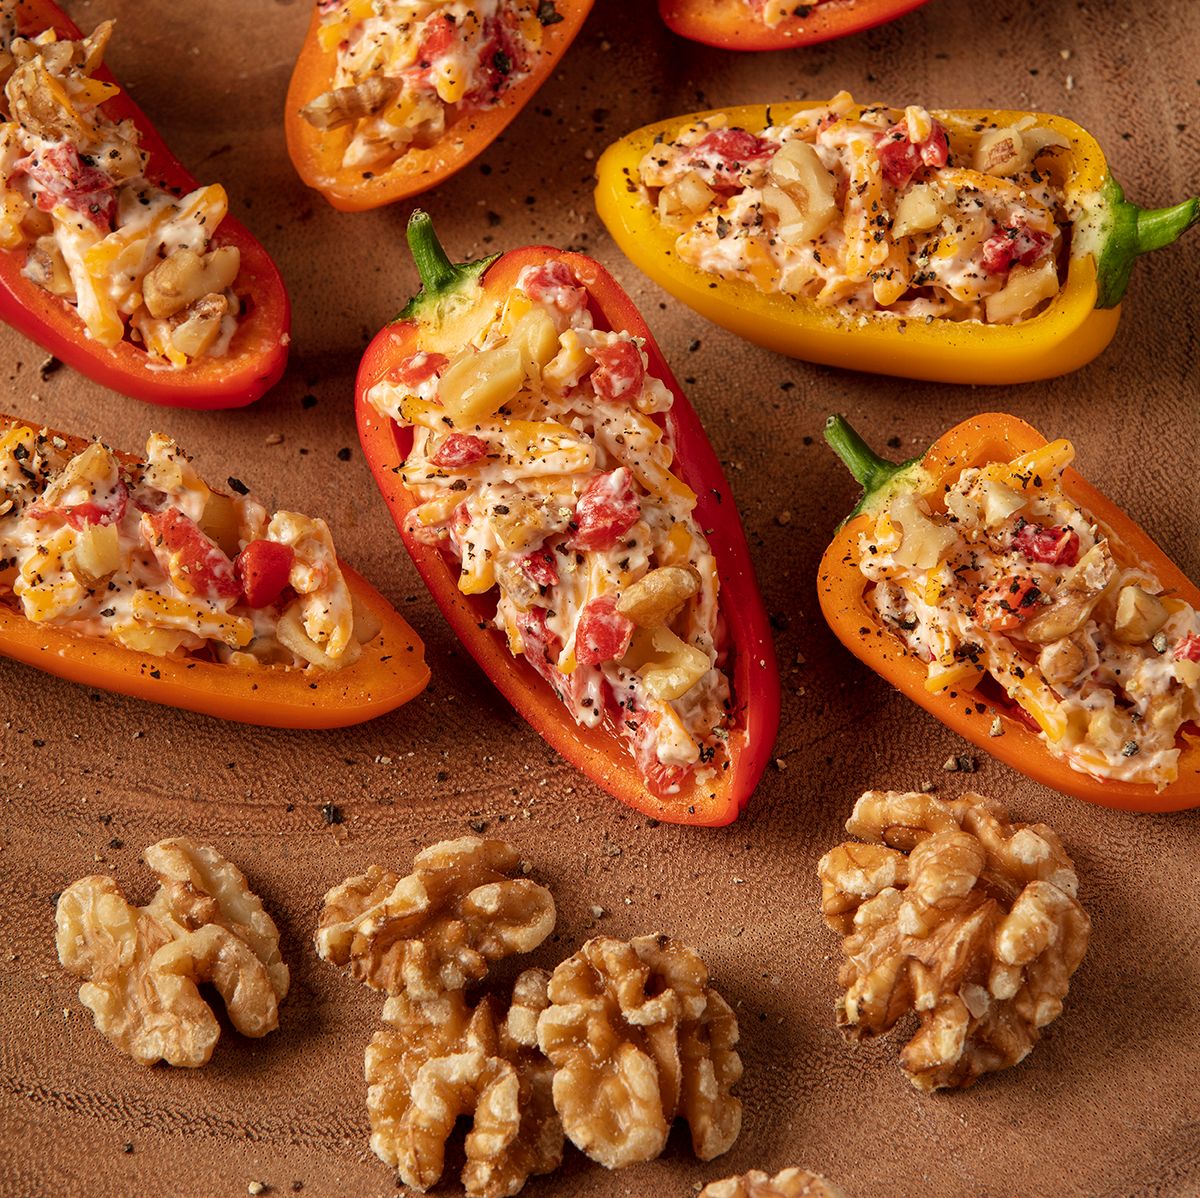 #StuffedPeppers – A tried and true #appetizer for #summerparties. These beauties are stuffed with cream cheese, sharp cheddar cheese, #pimentos and chopped #MarianiWalnuts. Finish them off with a healthy dusting of fresh ground pepper.